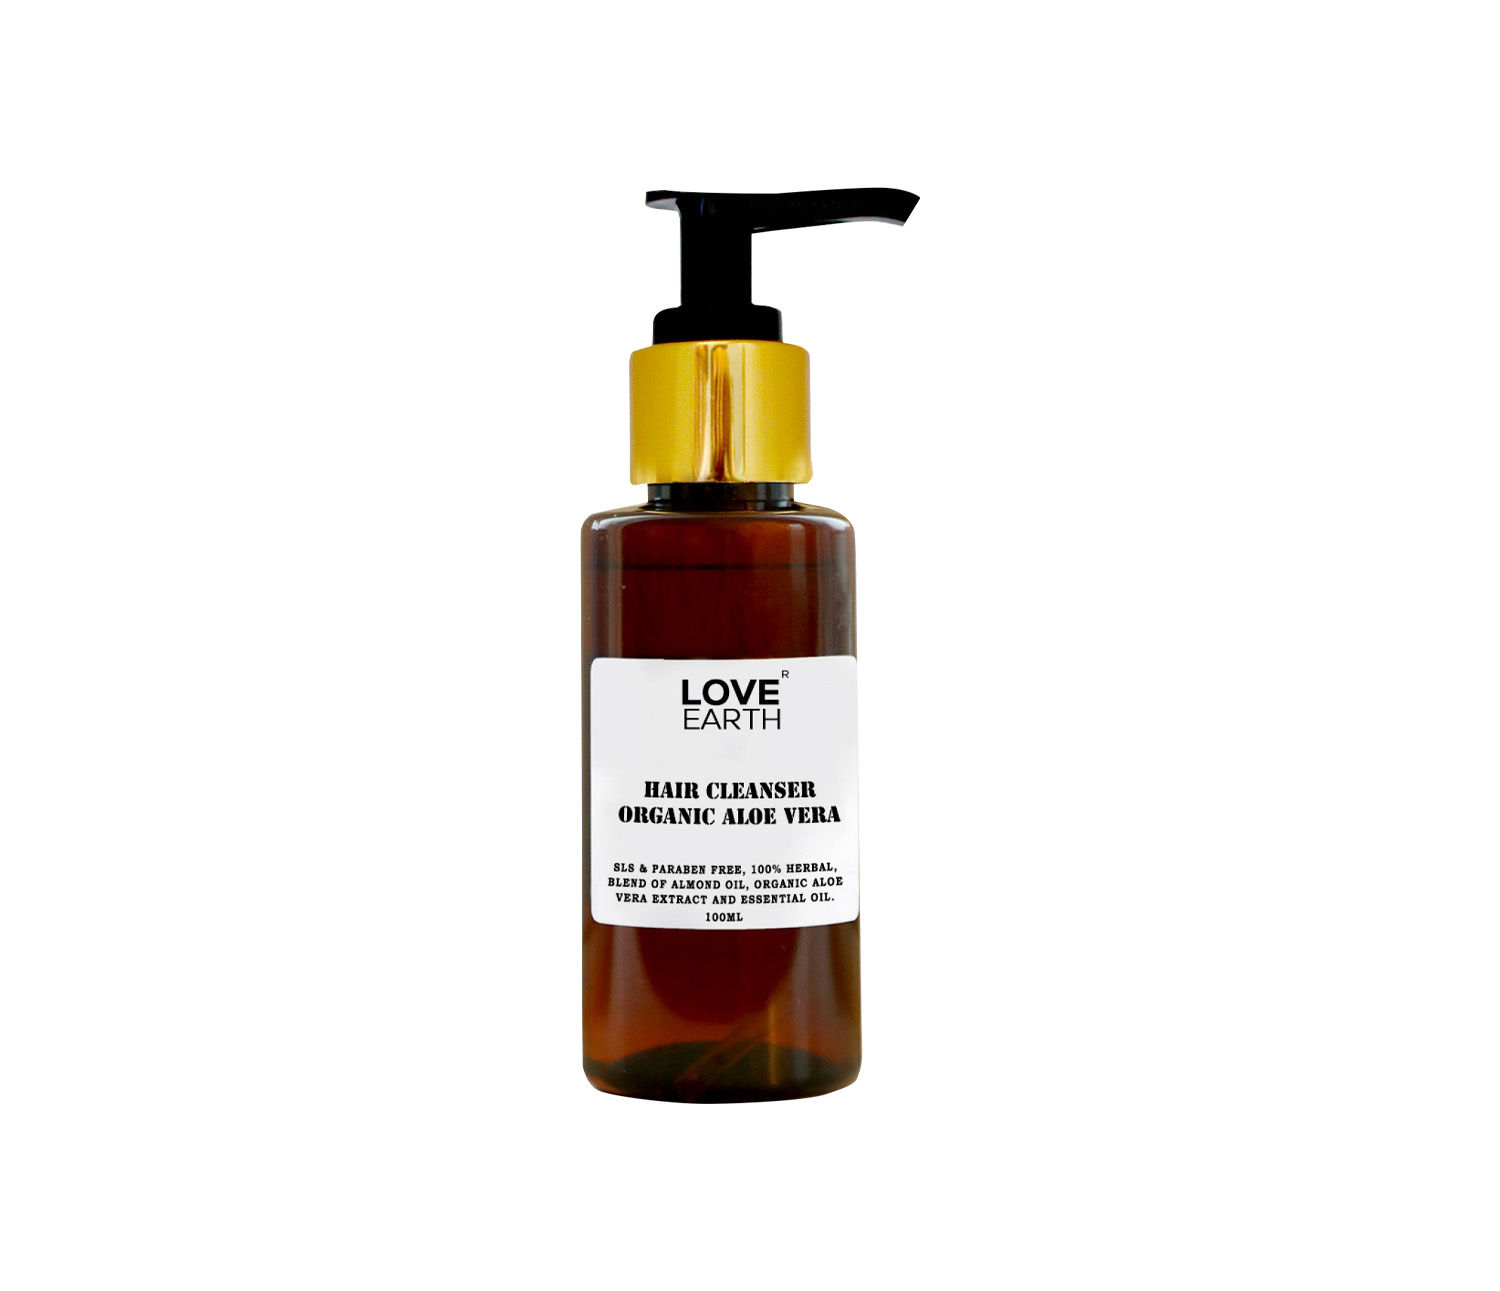 Love Earth Hair Cleanser Organic Aloe Vera with Almond oil for Hair Cleansing and Hydration